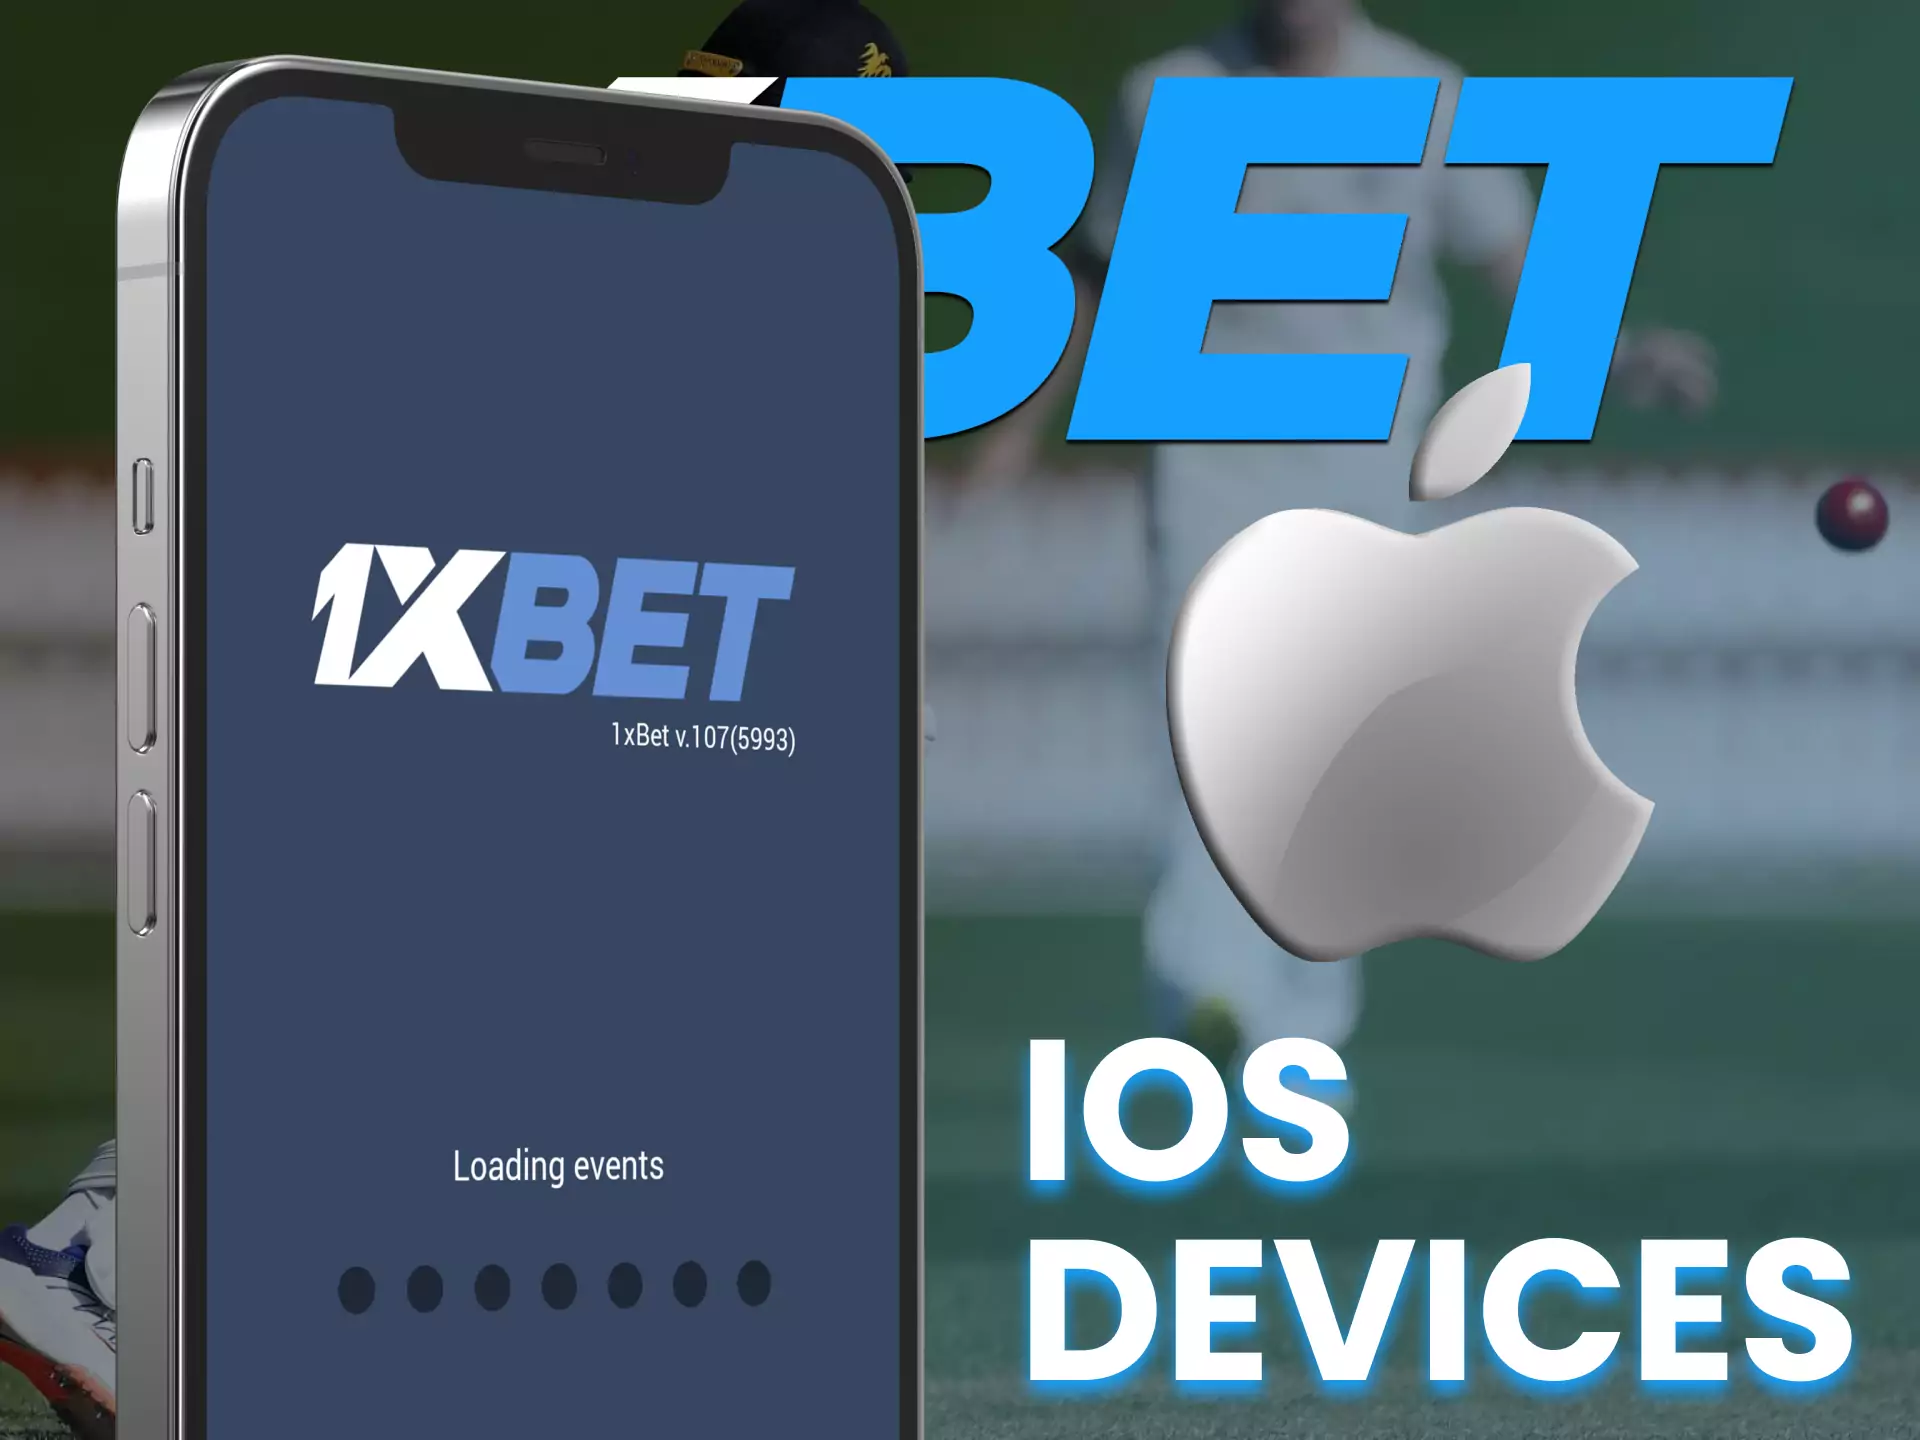 The 1xBet app is supported on various iOS devices.